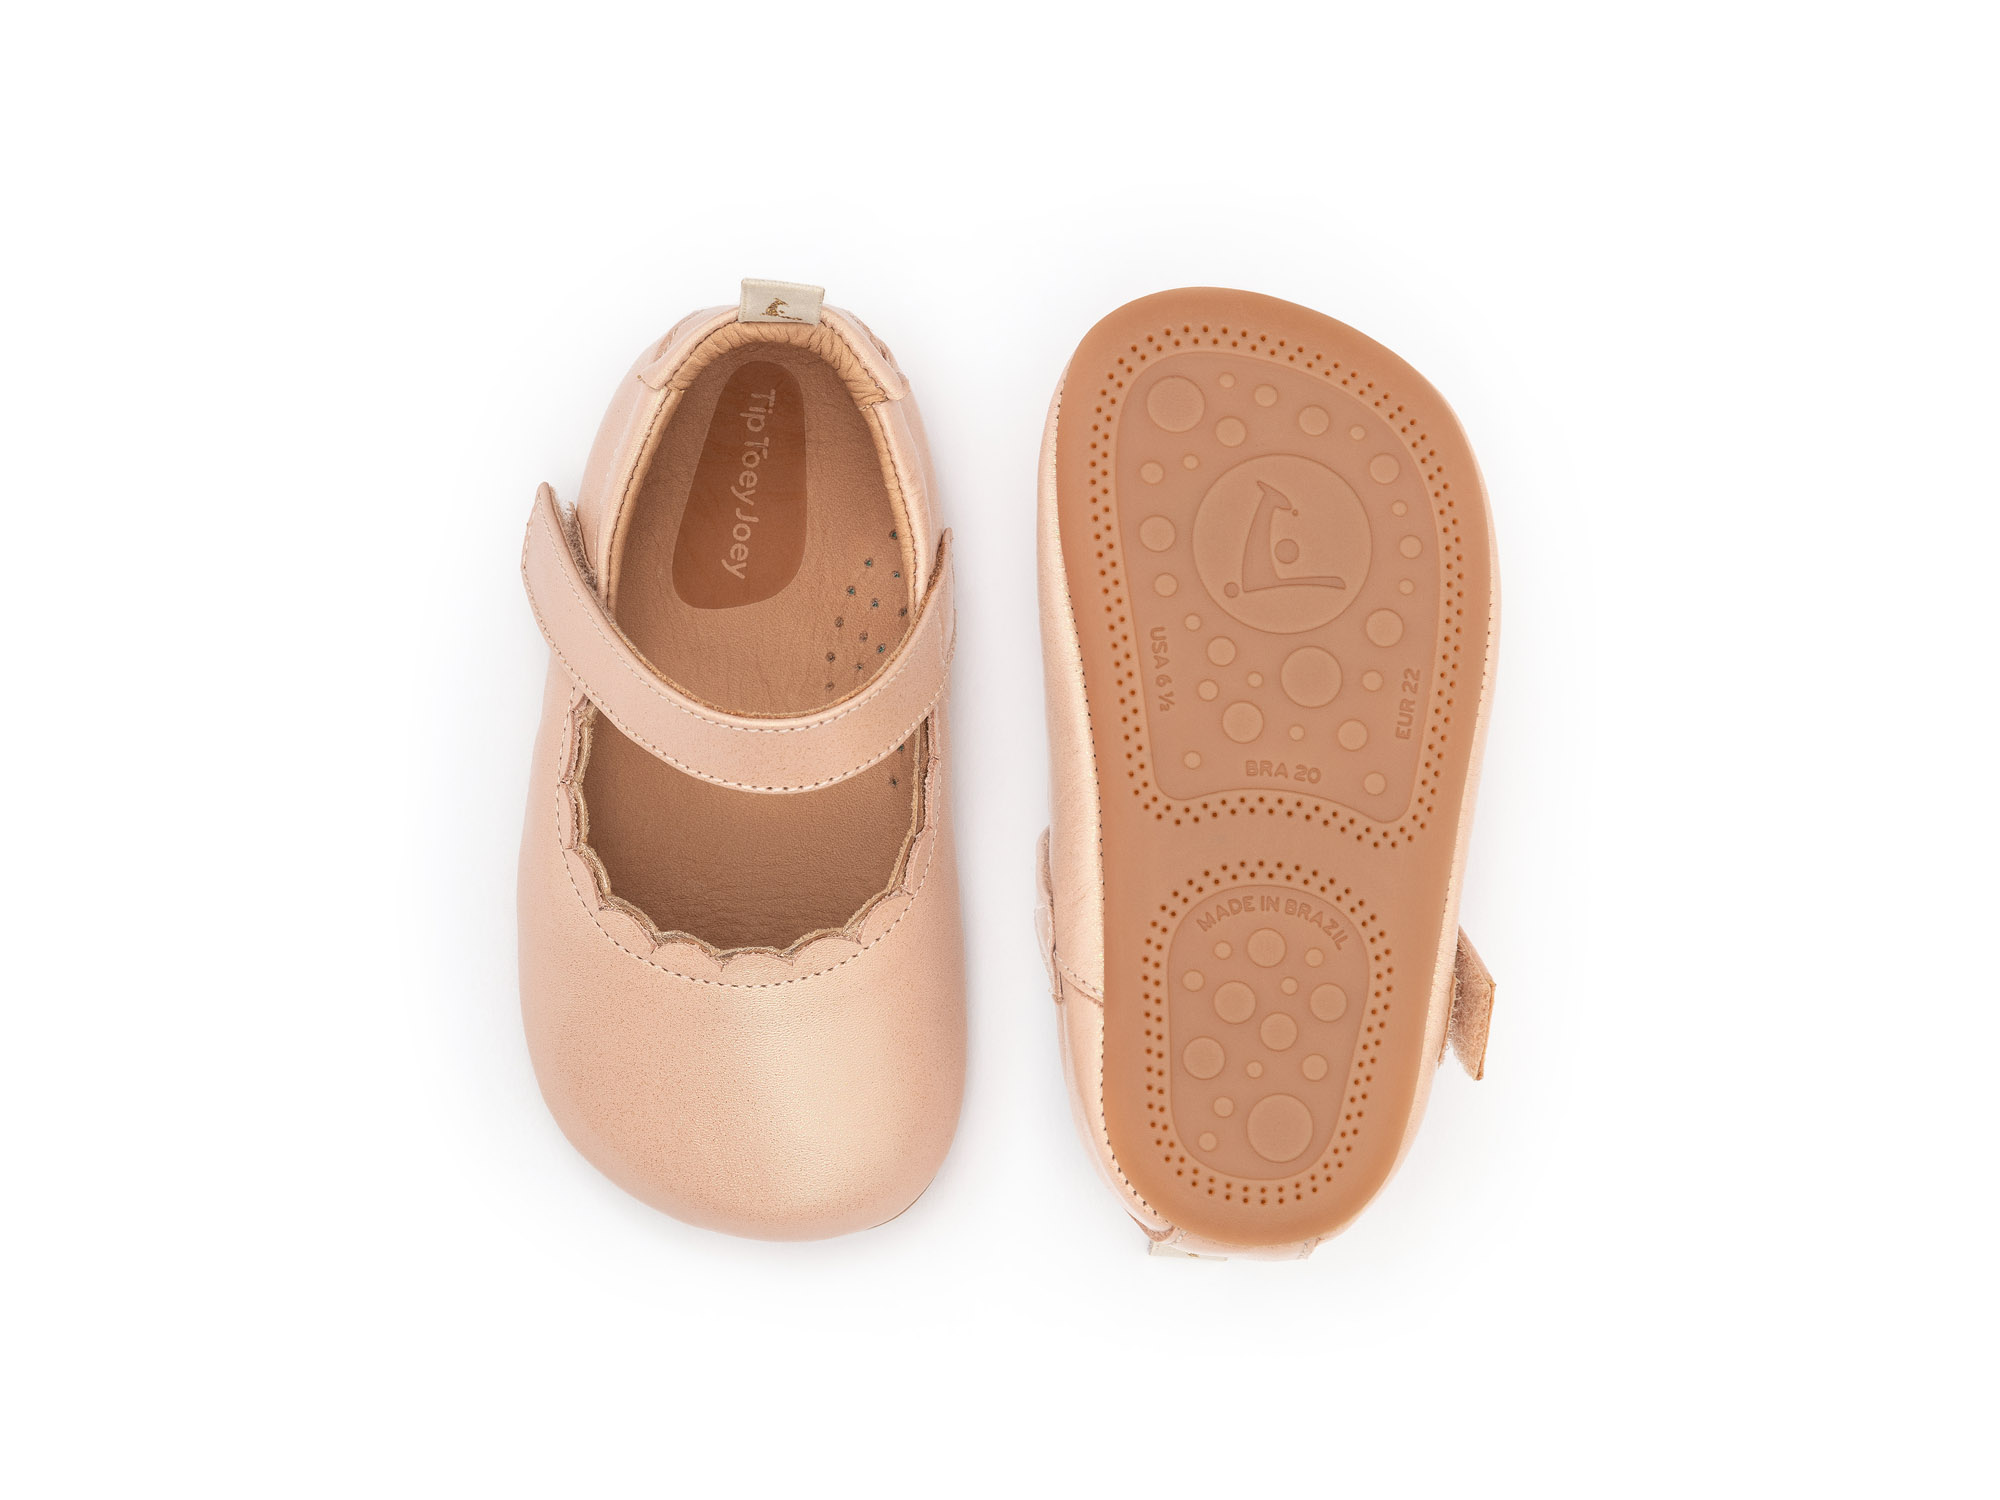 UP & GO Mary Janes for Girls Roundy | Tip Toey Joey - Australia - 2